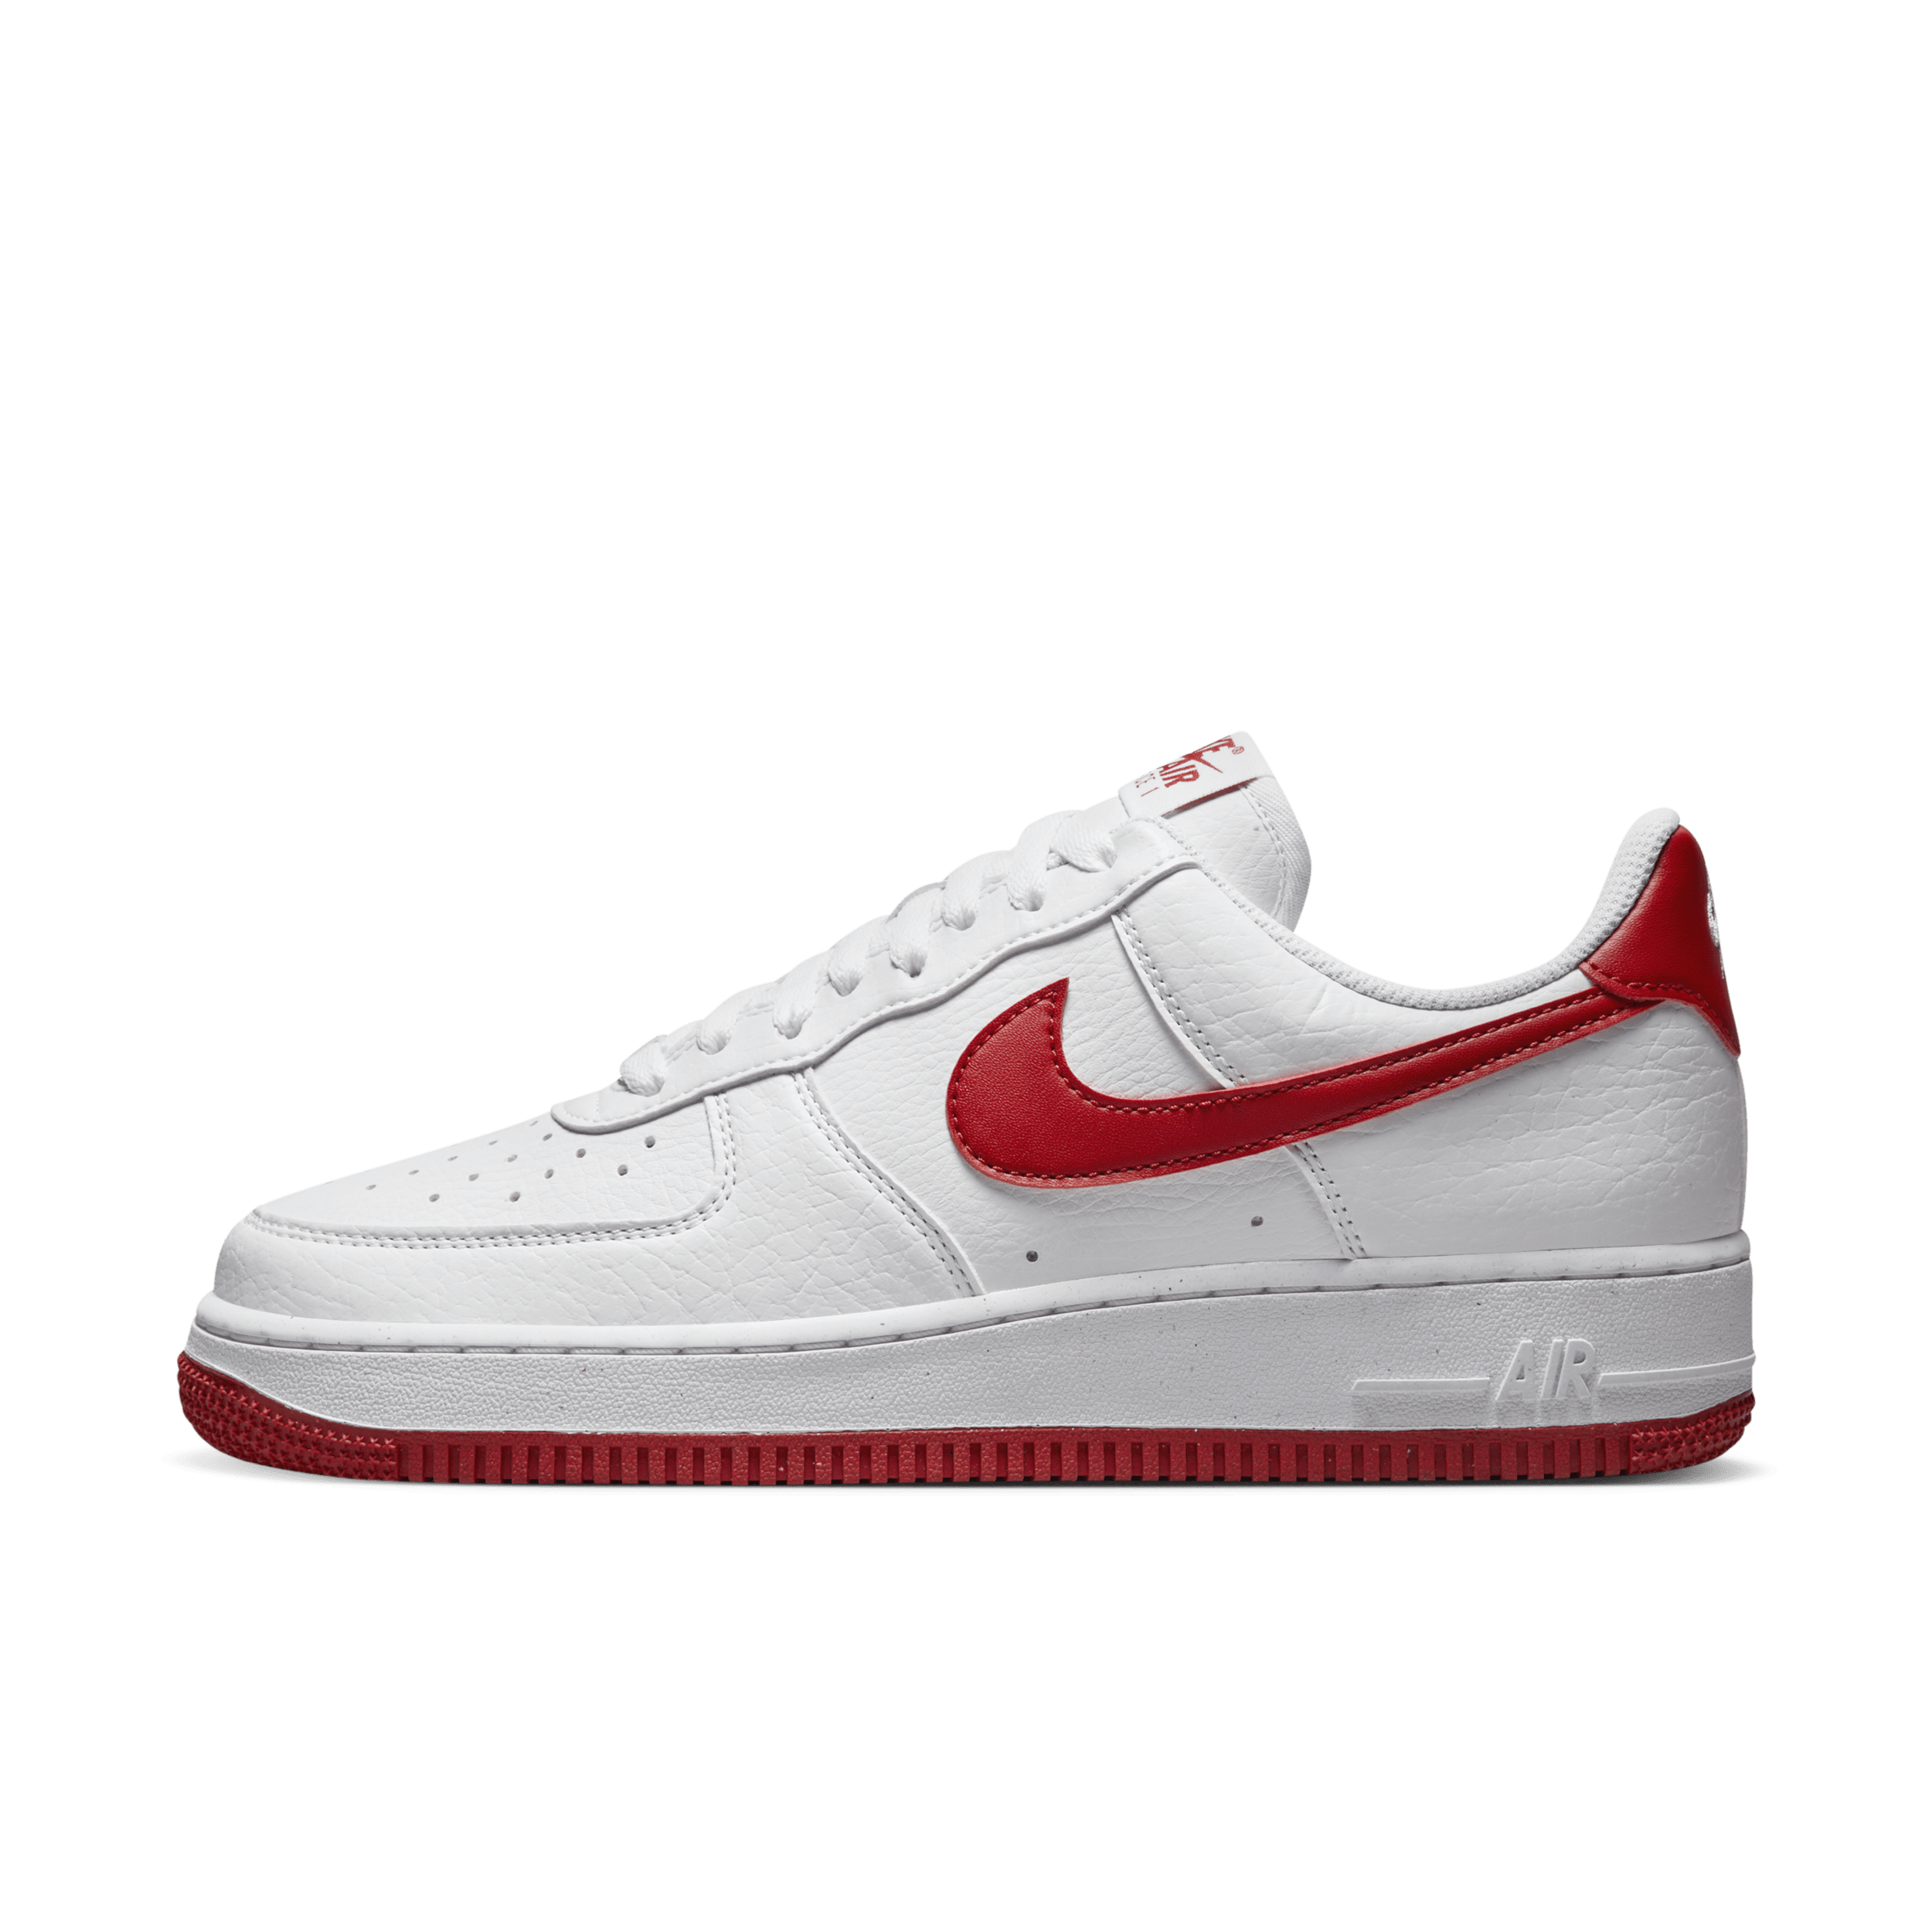 Chaussures Nike Air Force 1 '07 Next Nature pour Femme - Blanc